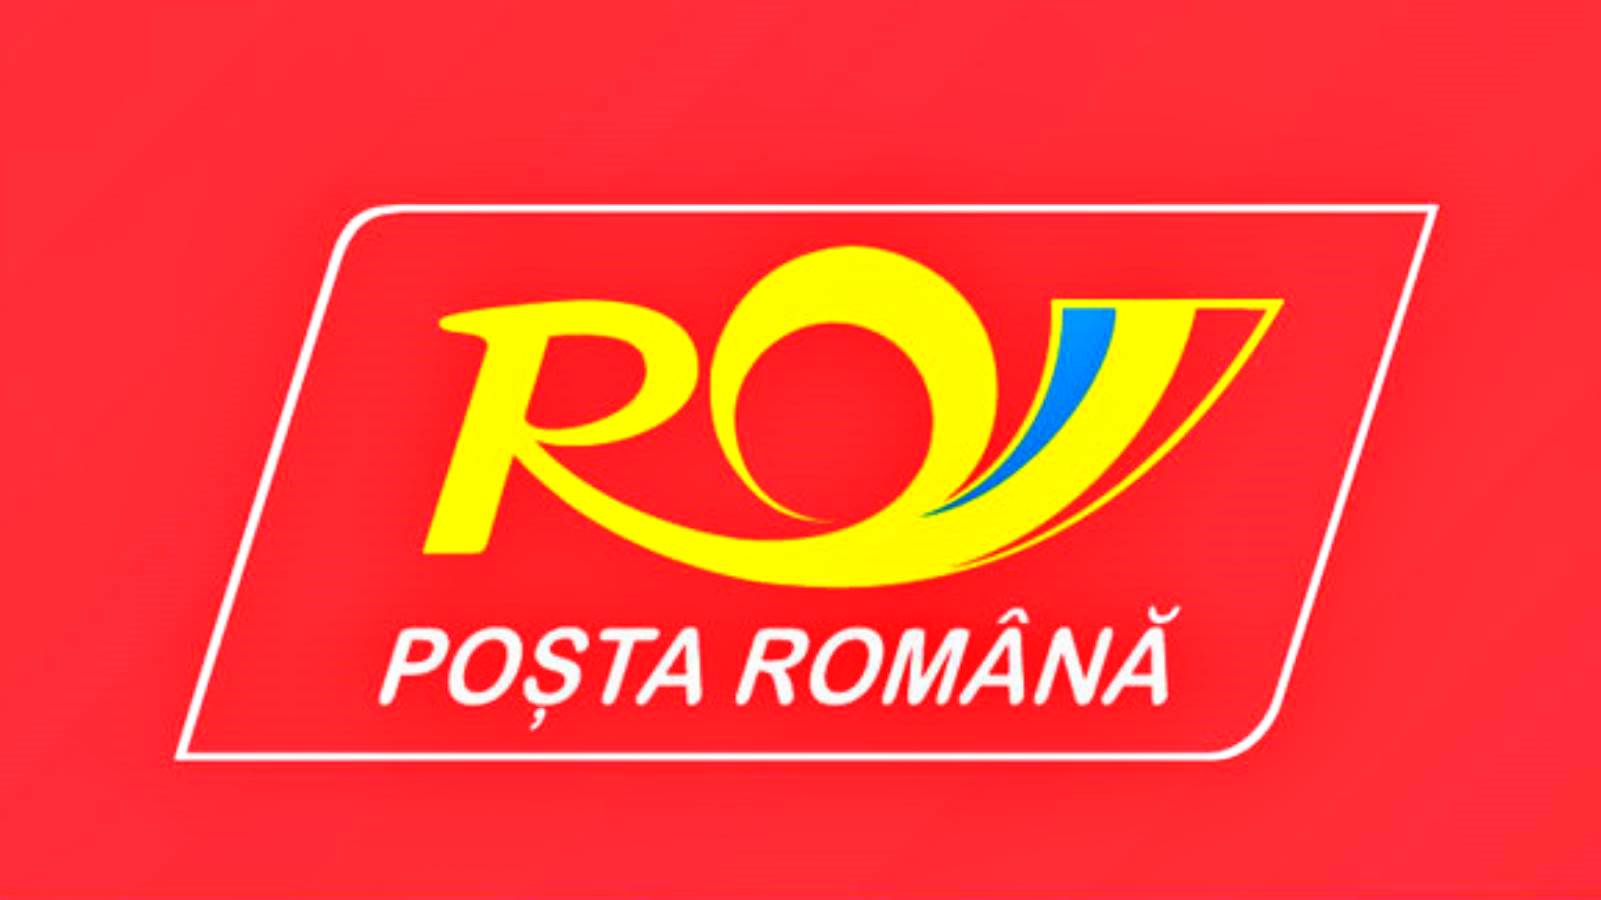 Notification of the Romanian Post to ALL Romanians before Christmas